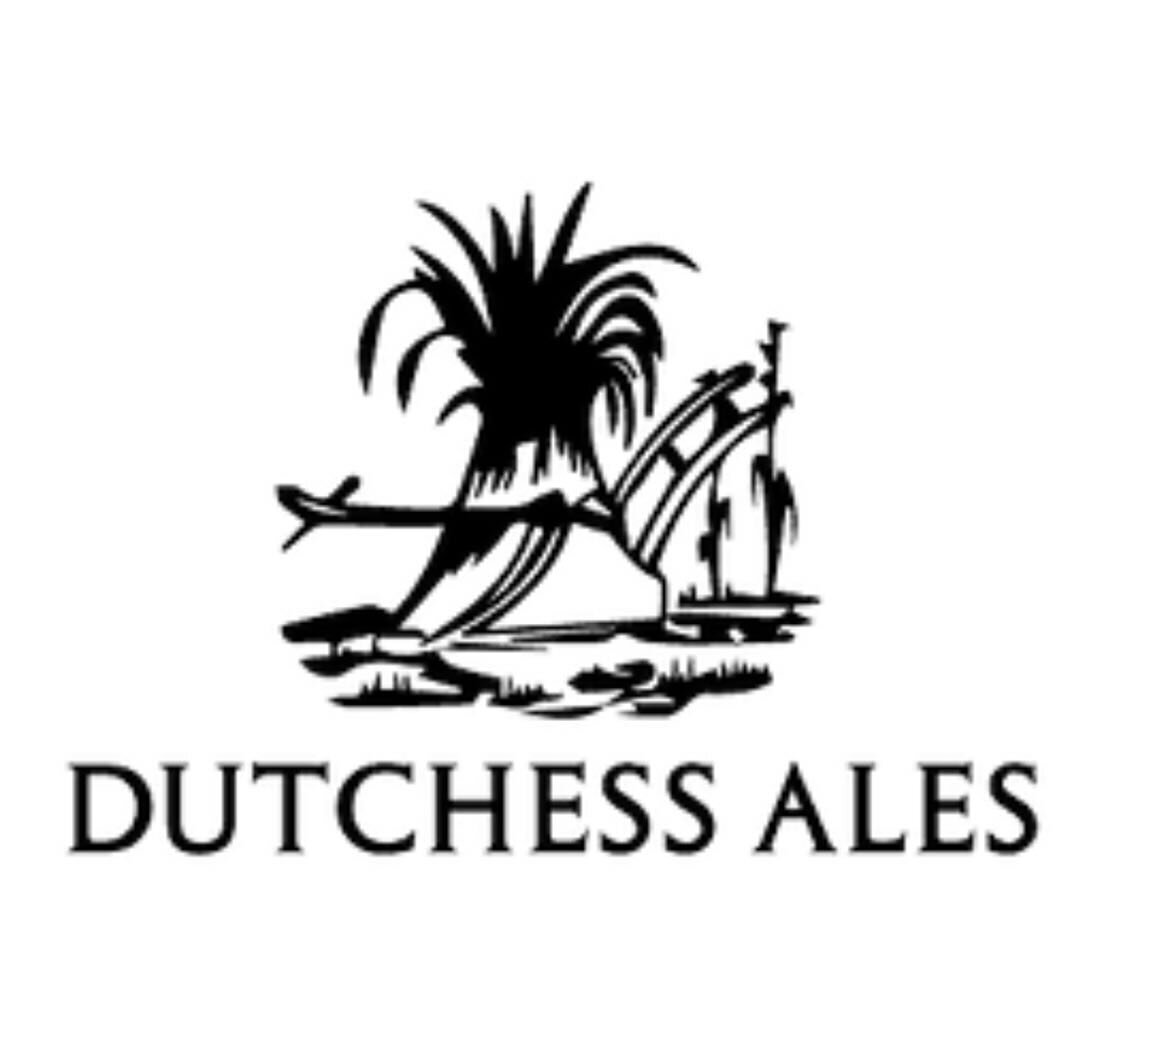 @dutchess_ales began with the goal of simply creating pure, balanced and nuanced Ales, in the British tradition, here in the US. Naturally over time, they evolved into brewing the Lagers we all love&hellip;with the same aim of Old World purity and ba